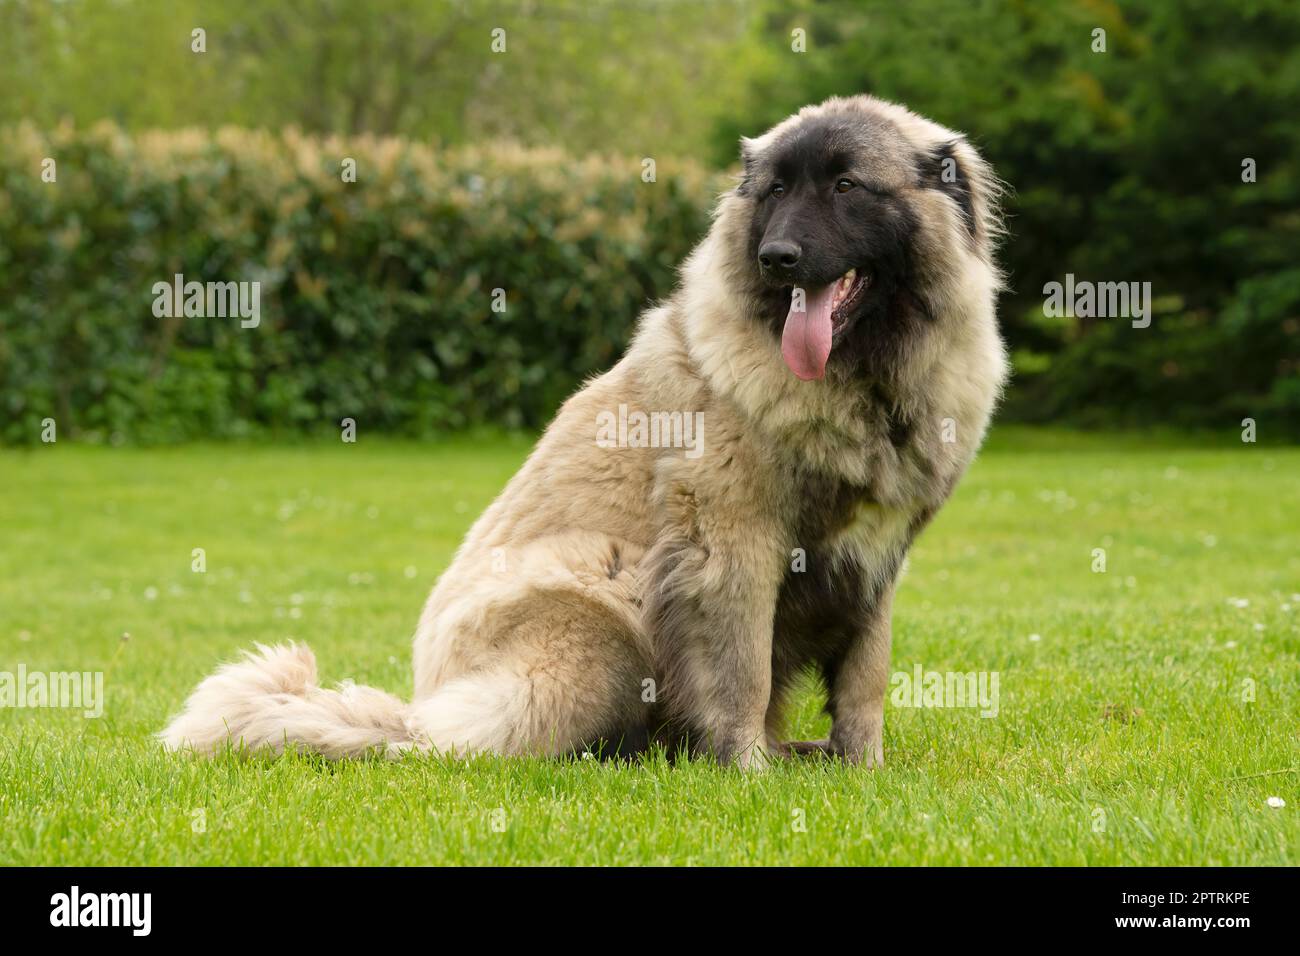 Nine months old Estrela Mountain young dog .It is a large breed of dog from the Estrela Mountains of Portugal bred to guard herds and homesteads.It is Stock Photo